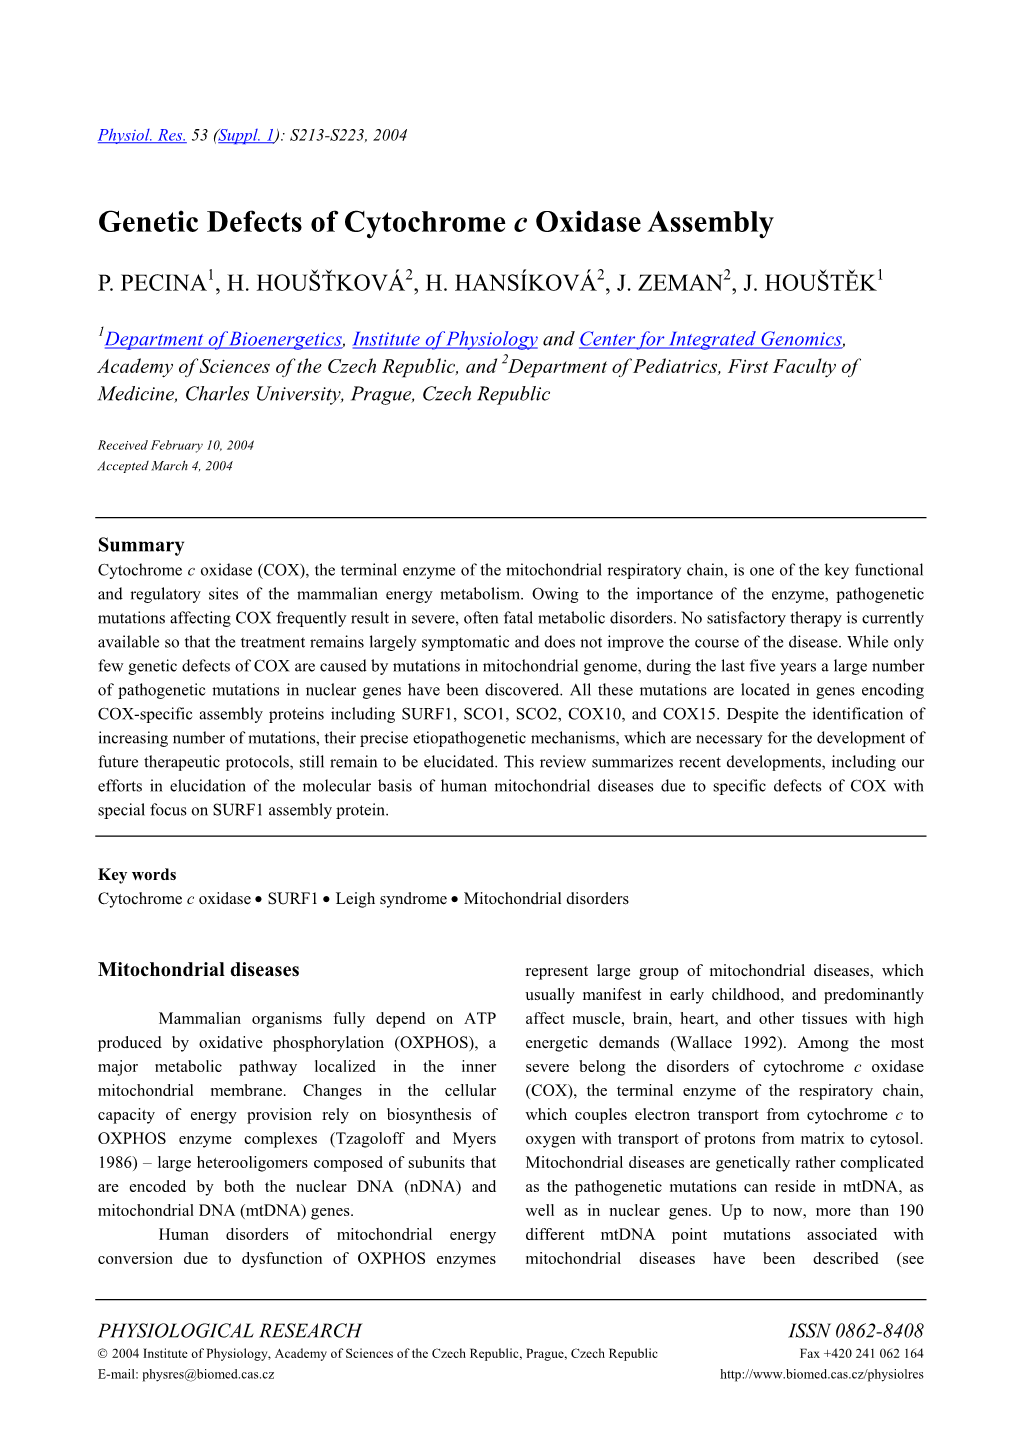 Genetic Defects of Cytochrome C Oxidase Assembly